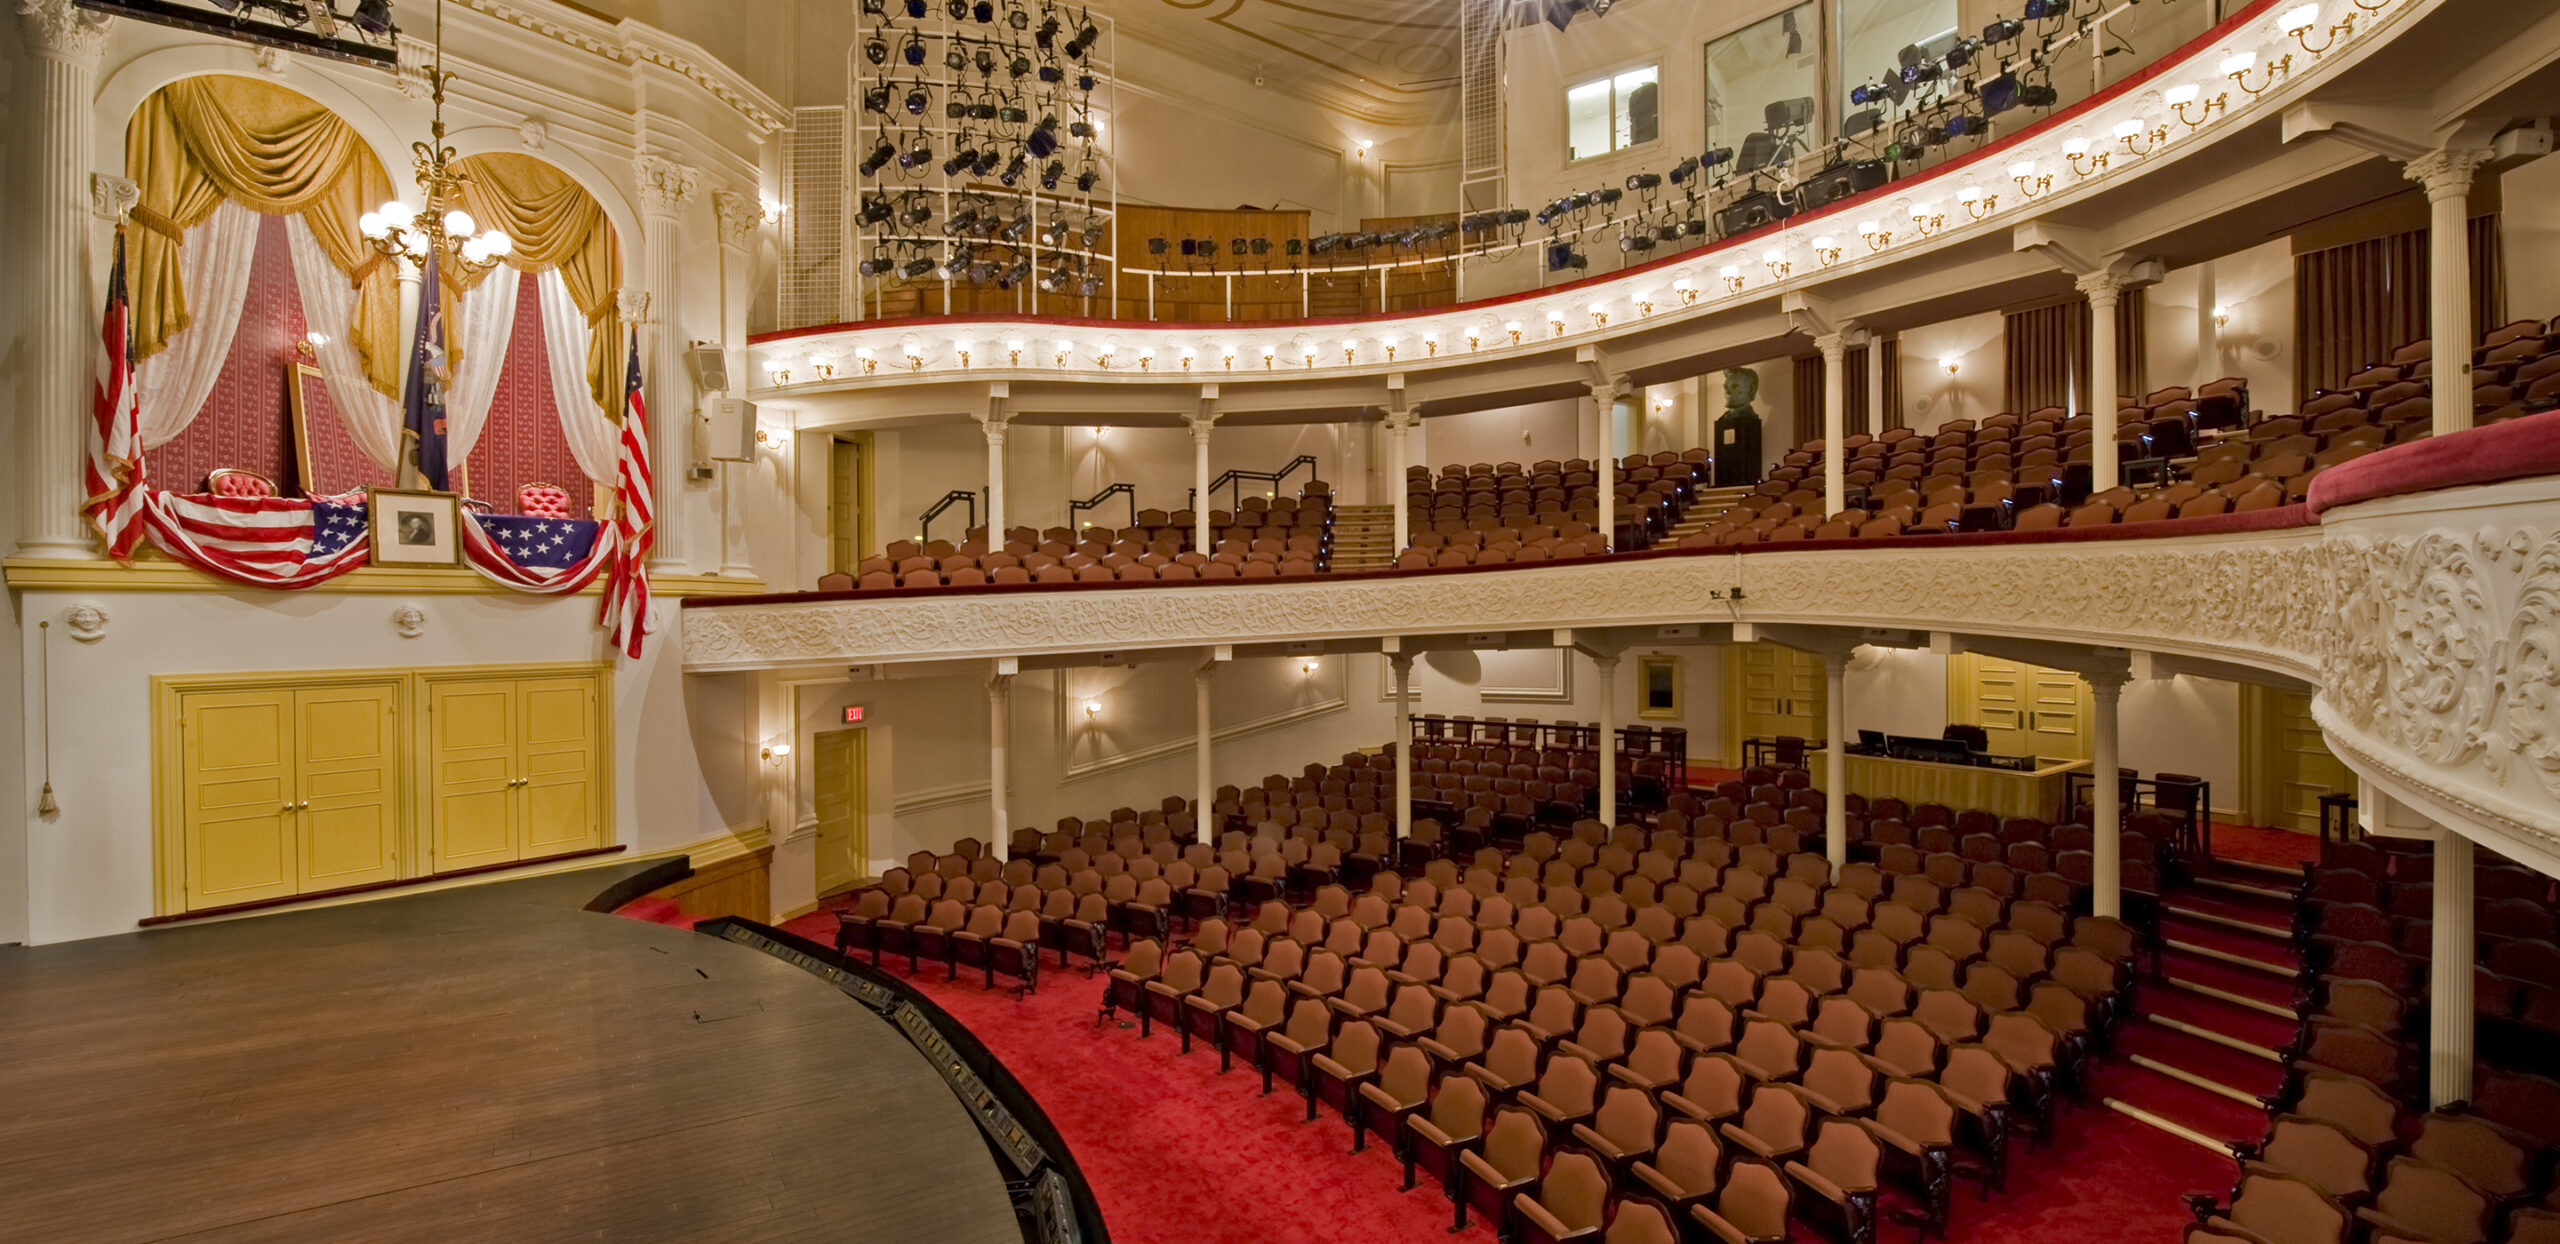 A side view of the stage and seating at Ford’s Theatre. On the left is the Presidential Box with an American flag, a framed picture of George Washington and American flag bunting draped over the box.